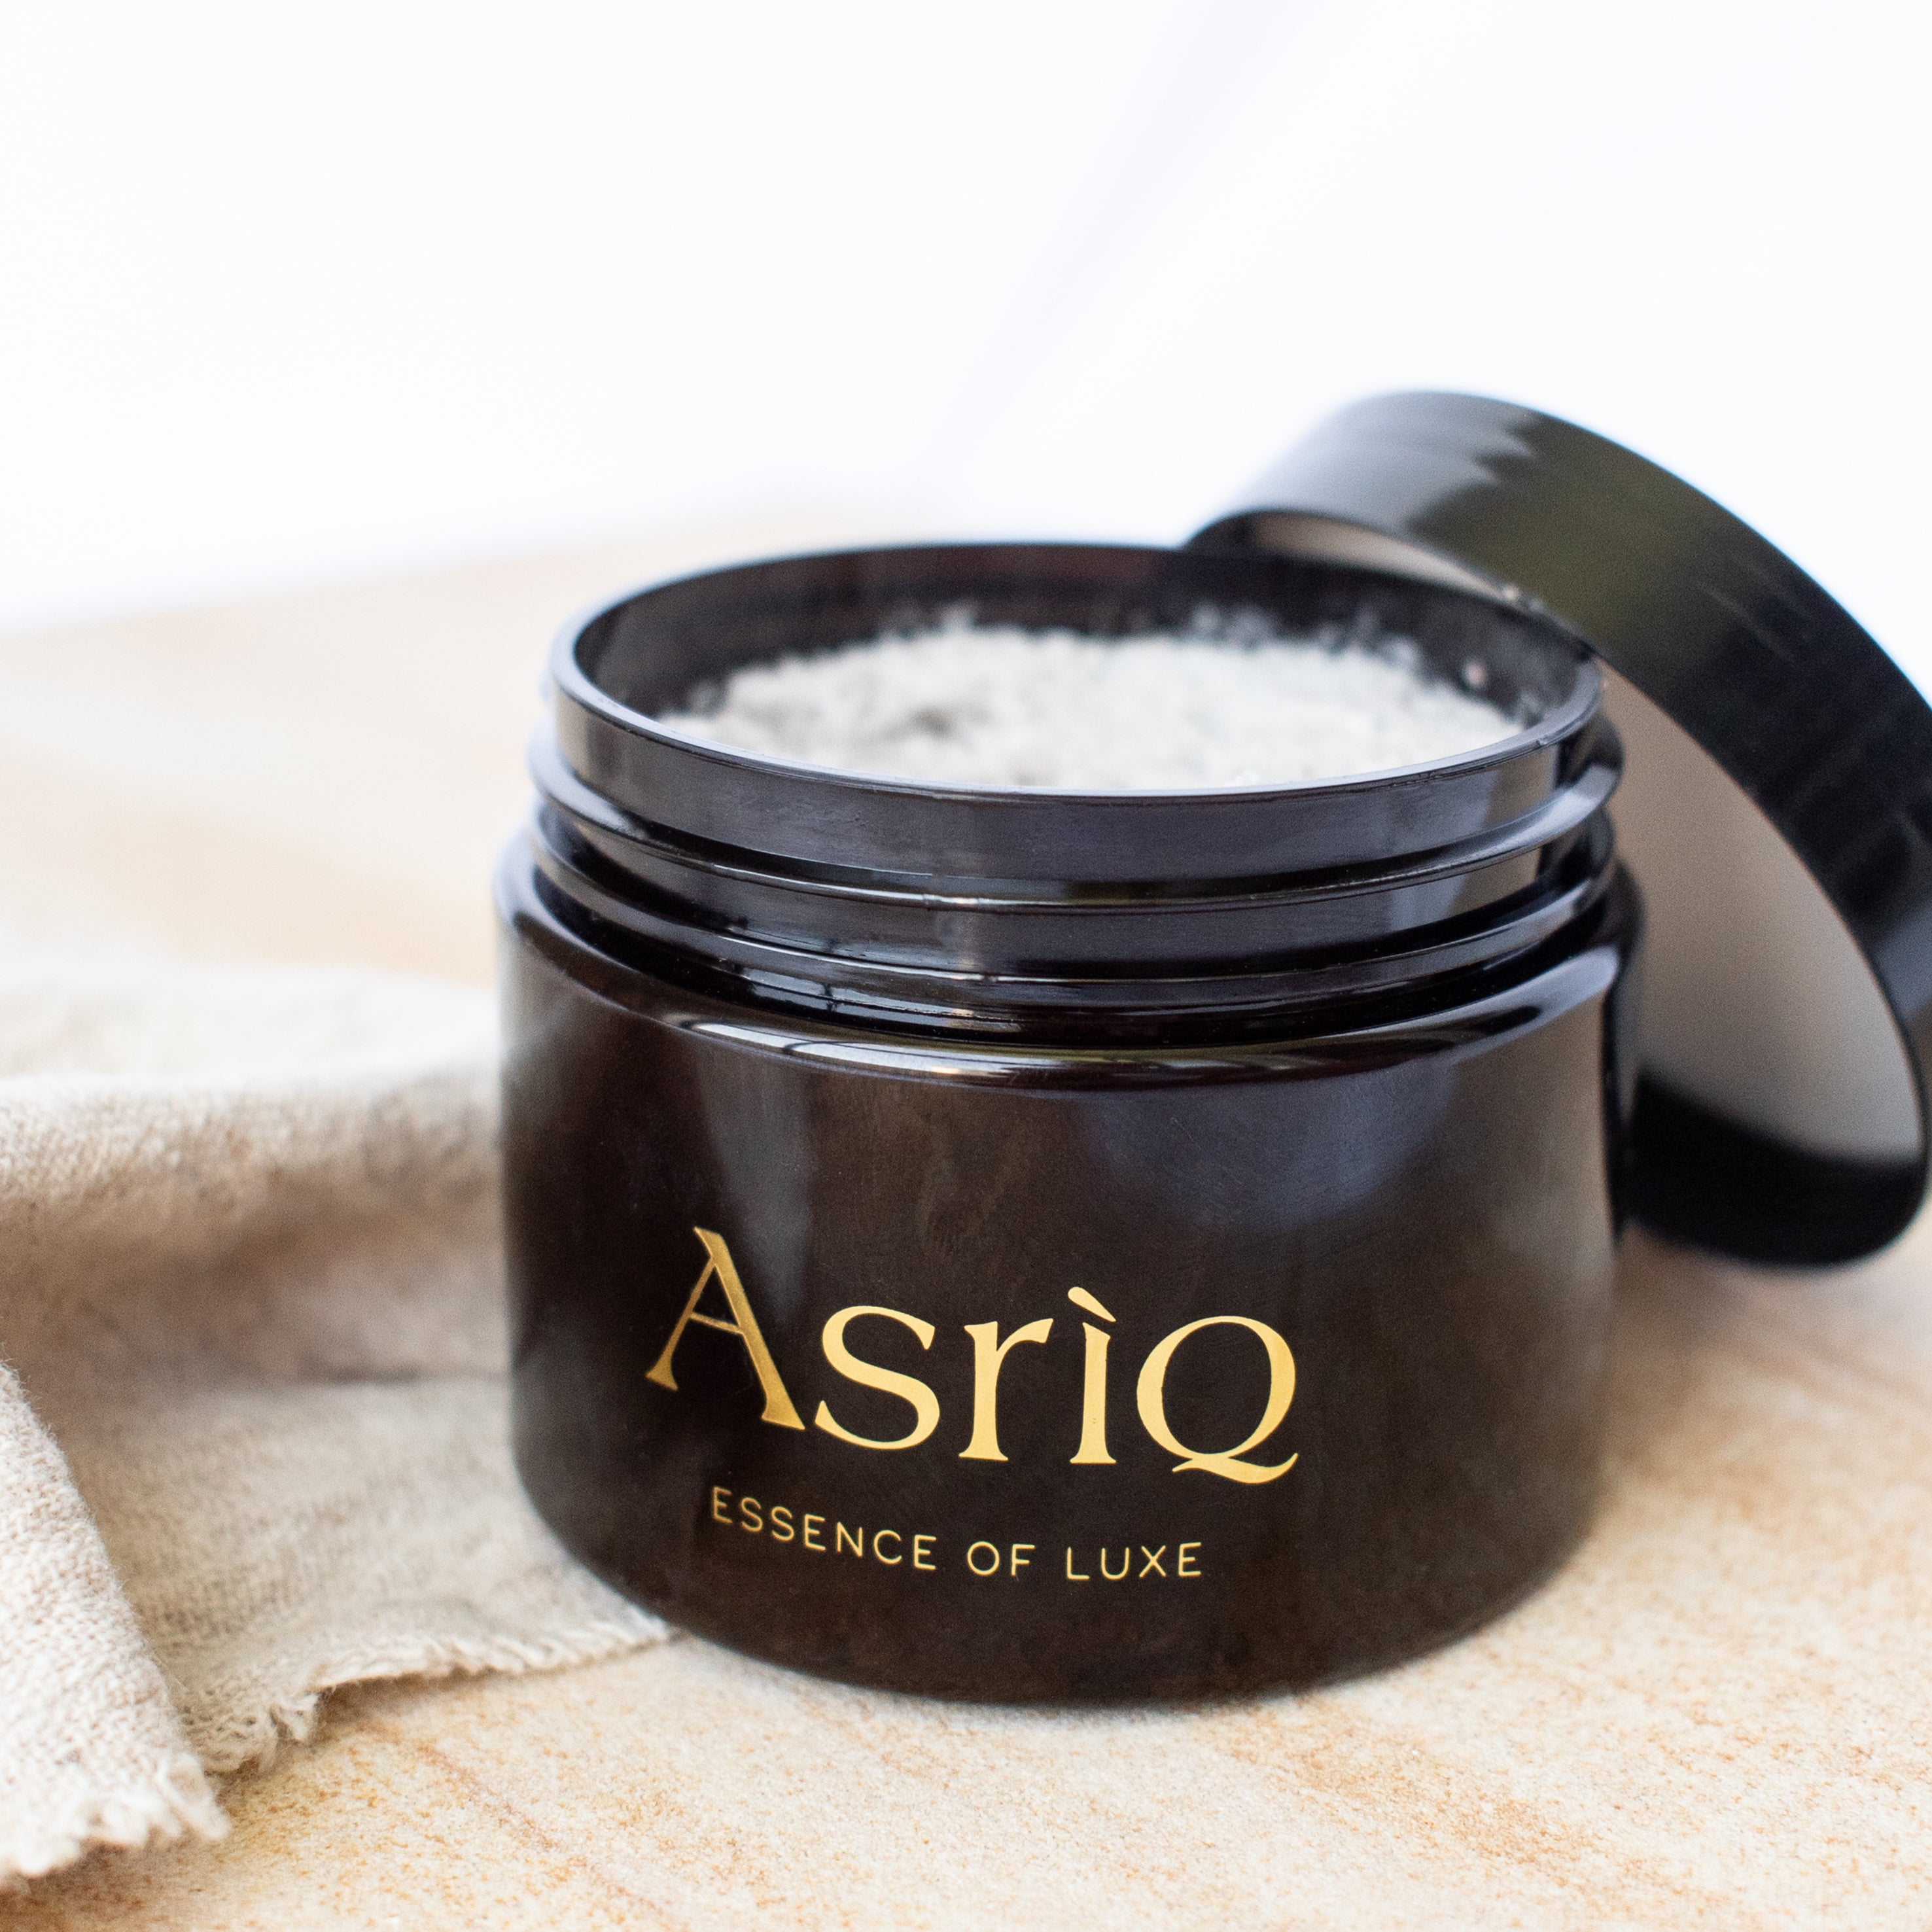 smooths away dryness and impurities, leaving your skin feeling instantly softer, smoother and brighter